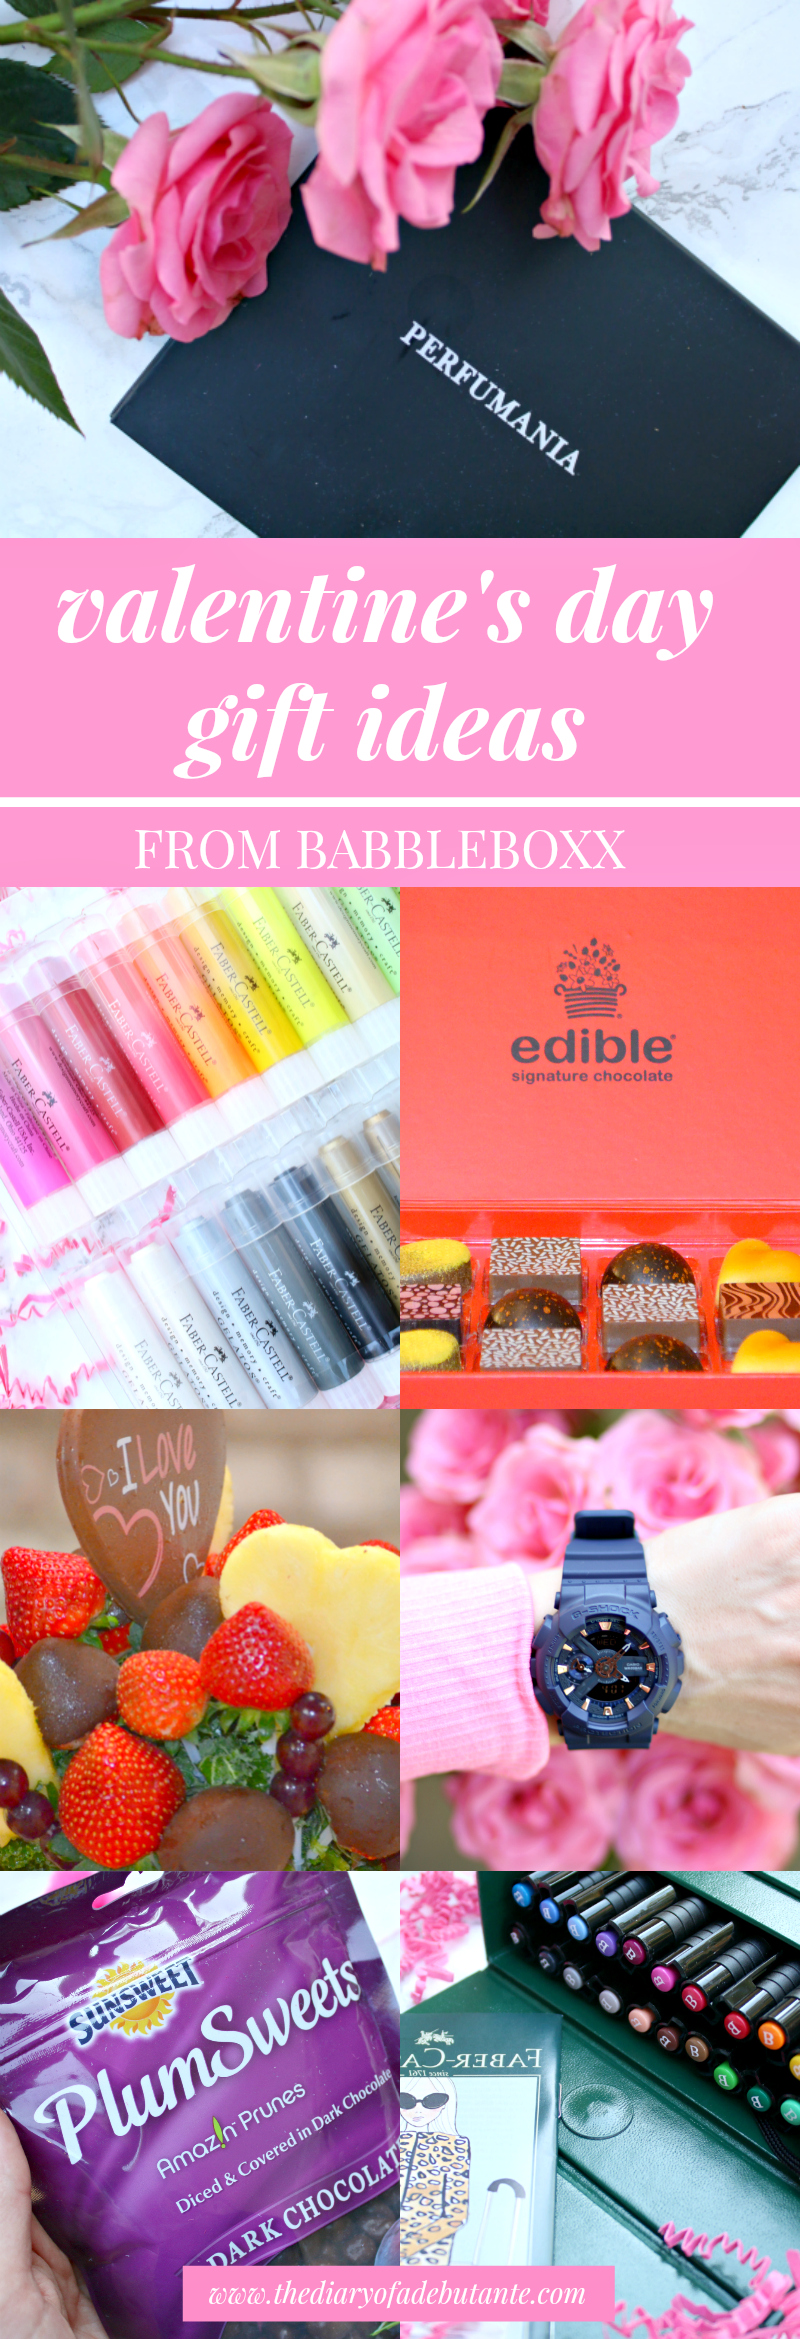 Unique Valentine's Gift Ideas from Babbleboxx